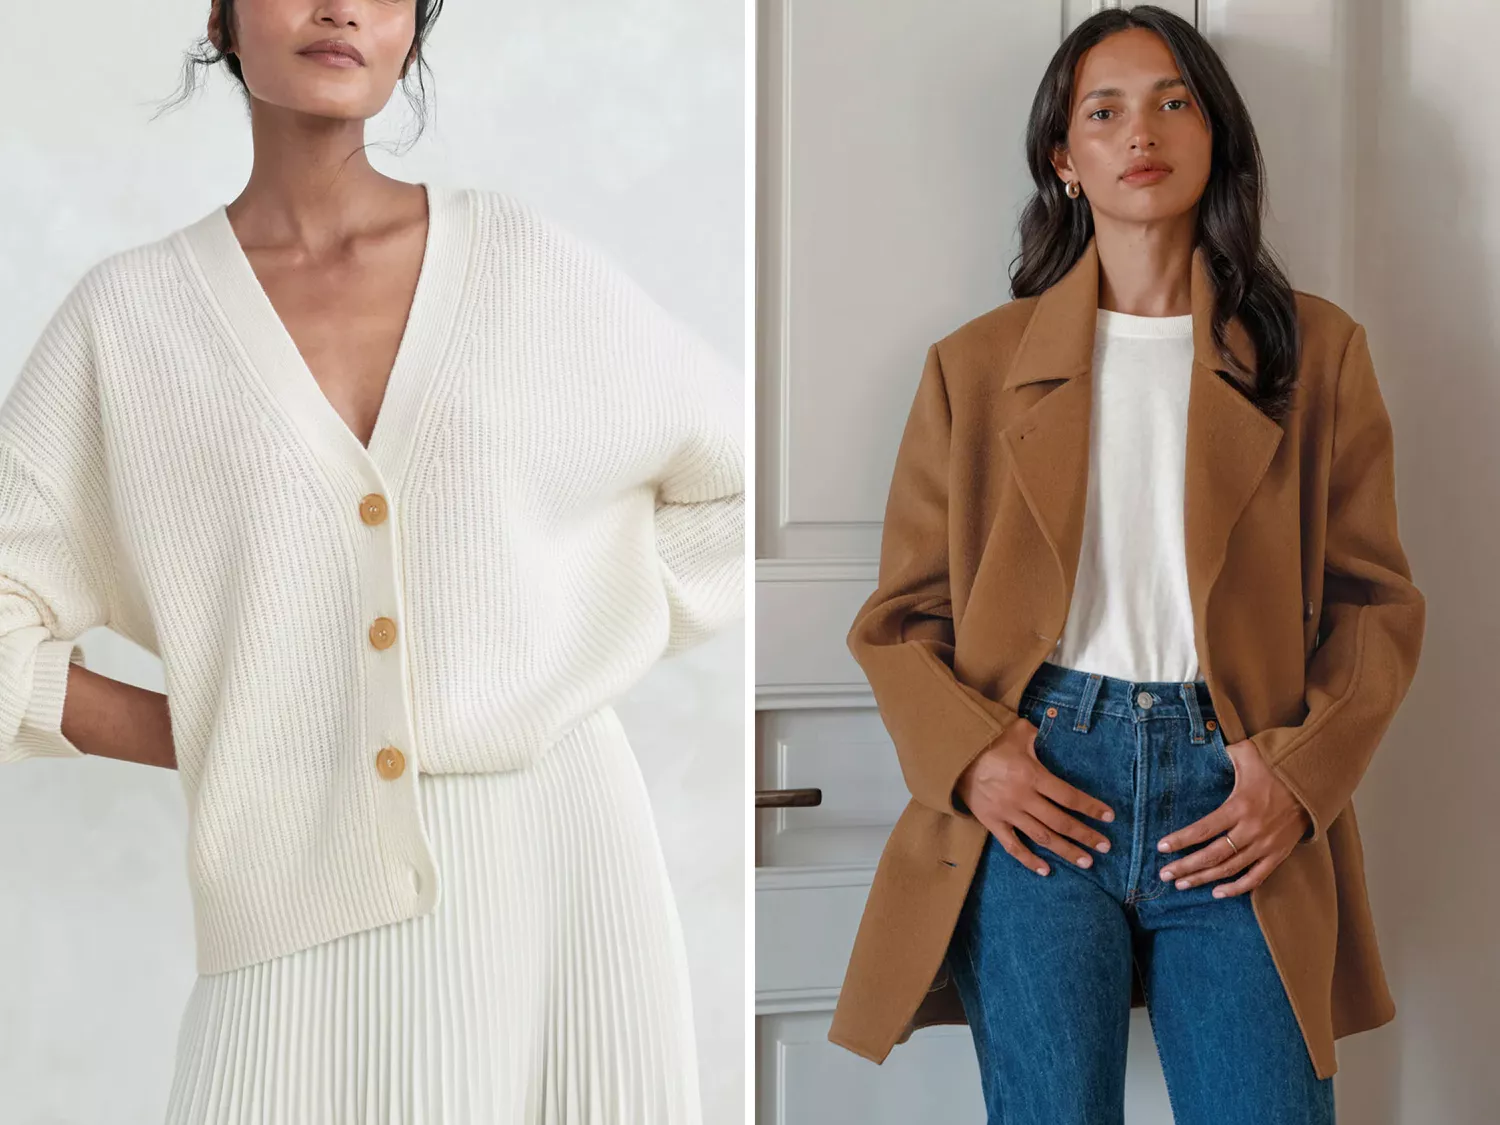 Don’t Miss the Two-Day Sale on Sweaters from My Go-To Basics Brand